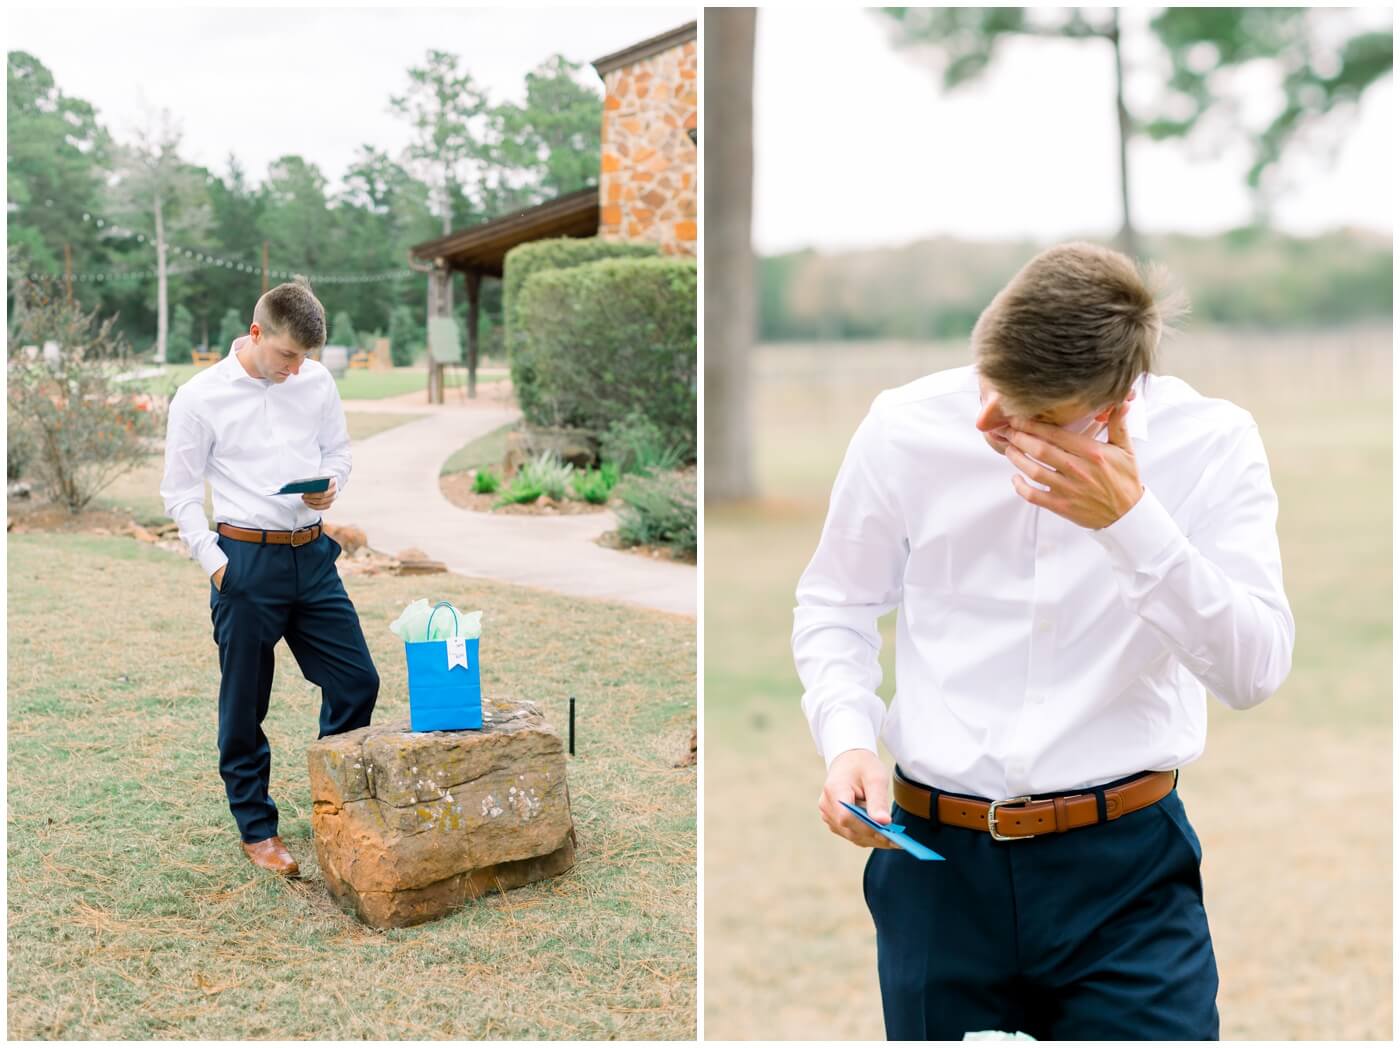 Houston Wedding at The Vine | the groom is crying as he reads a letter from the bride